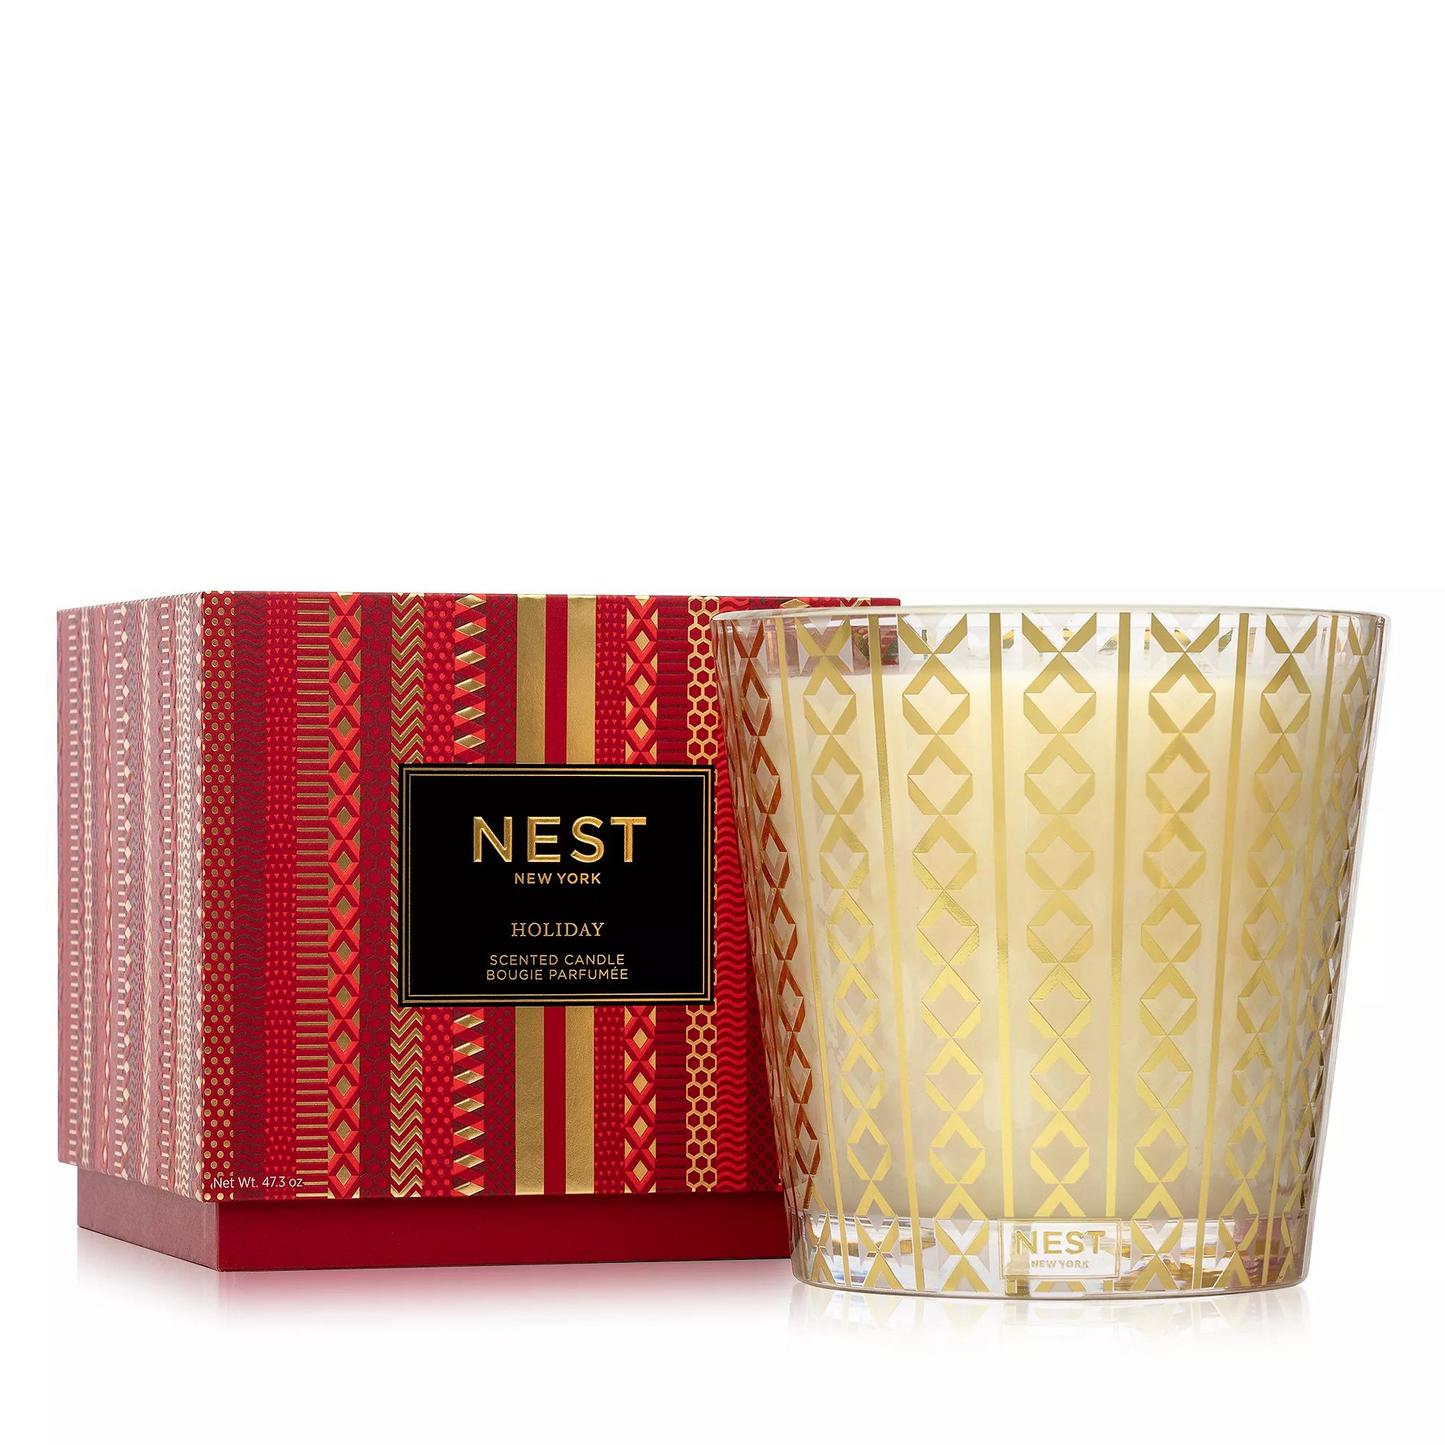 Primary Image of Nest Fragrances Holiday 4-Wick Candle (47.3 oz)